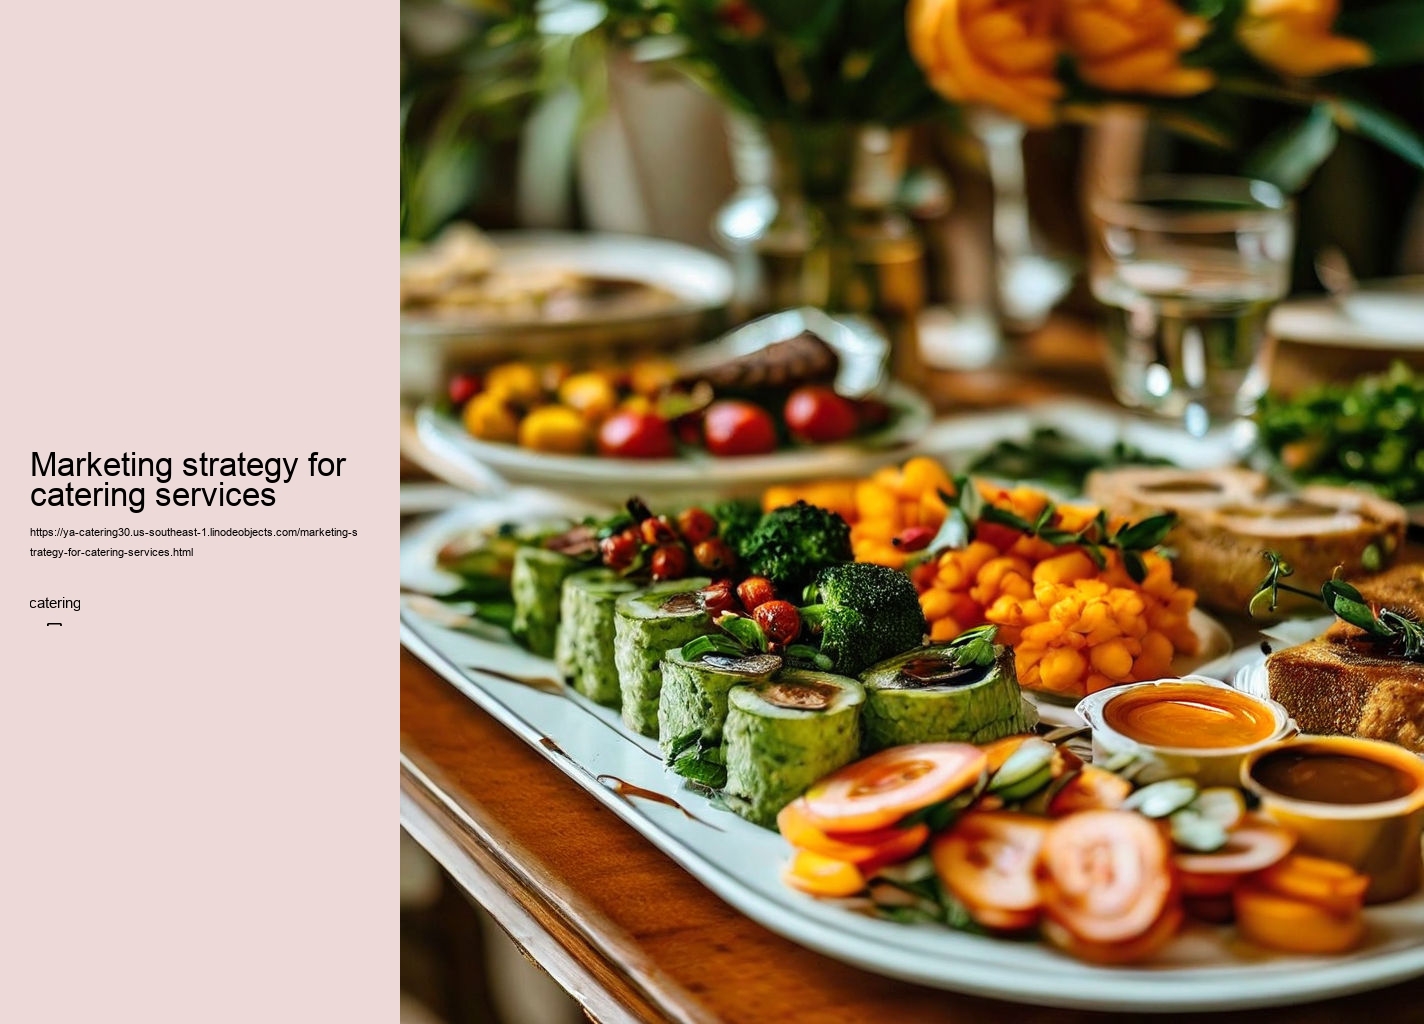 Marketing strategy for catering services